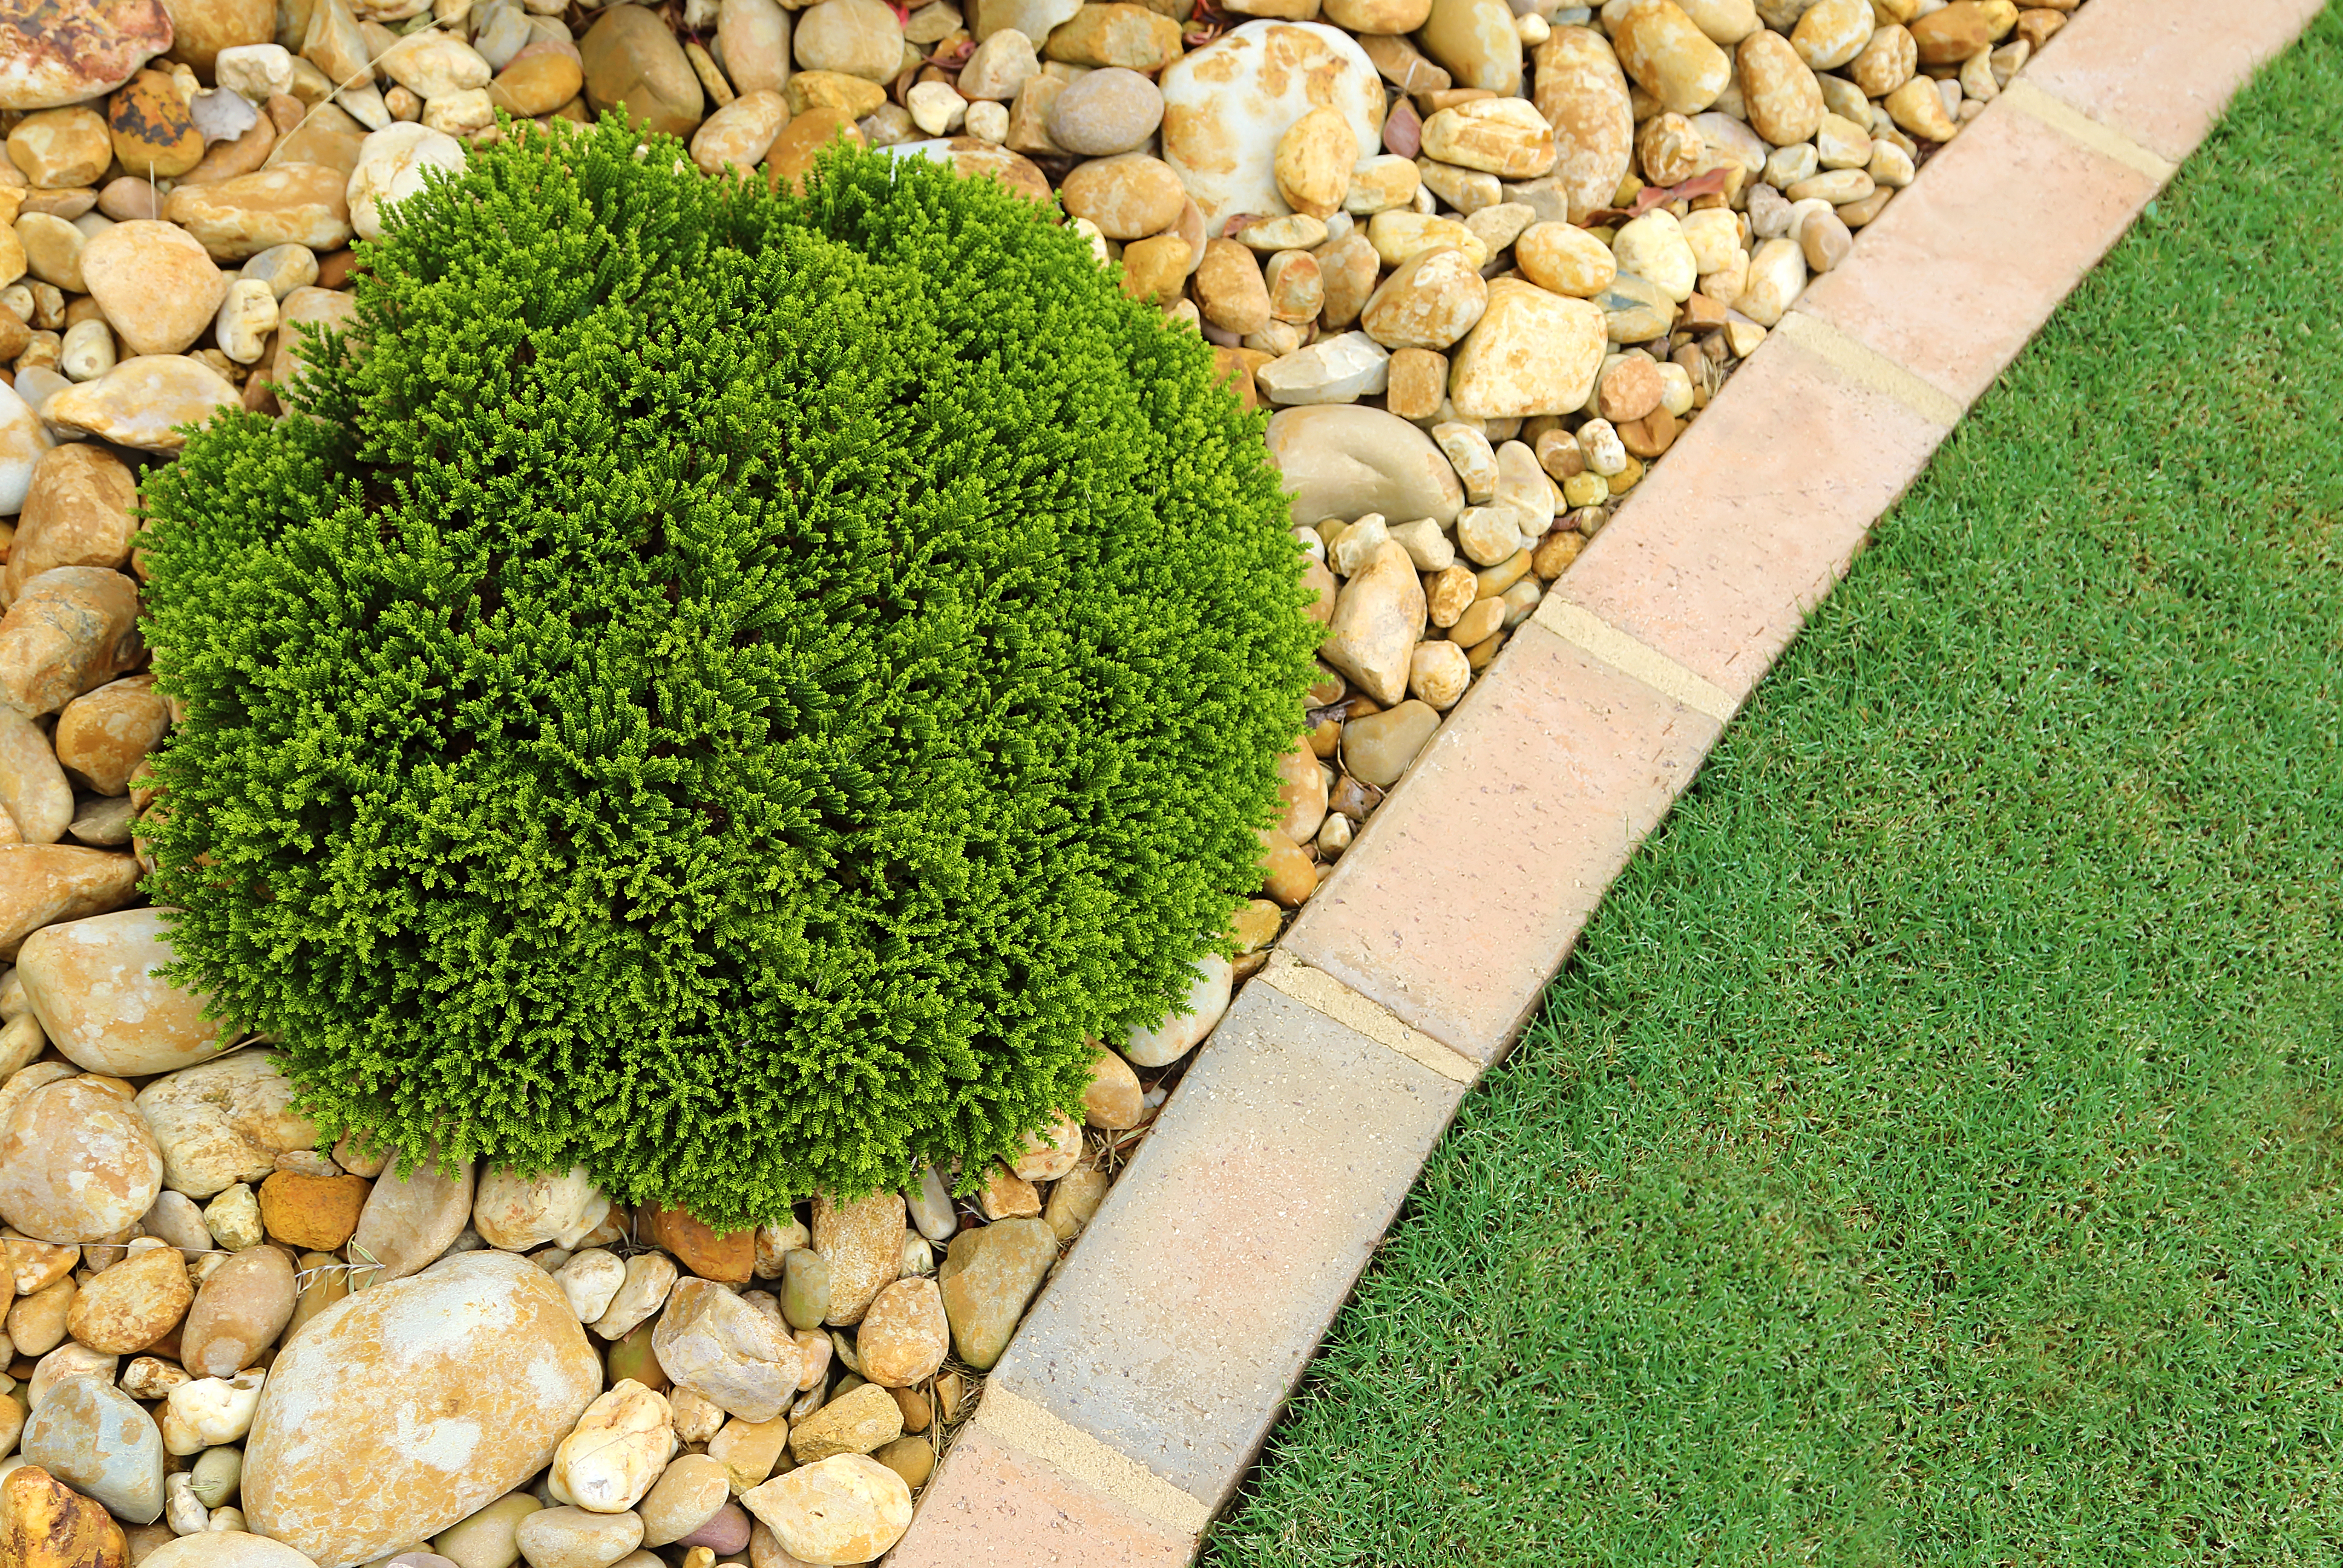 healthy lawn against flower beds with rocks